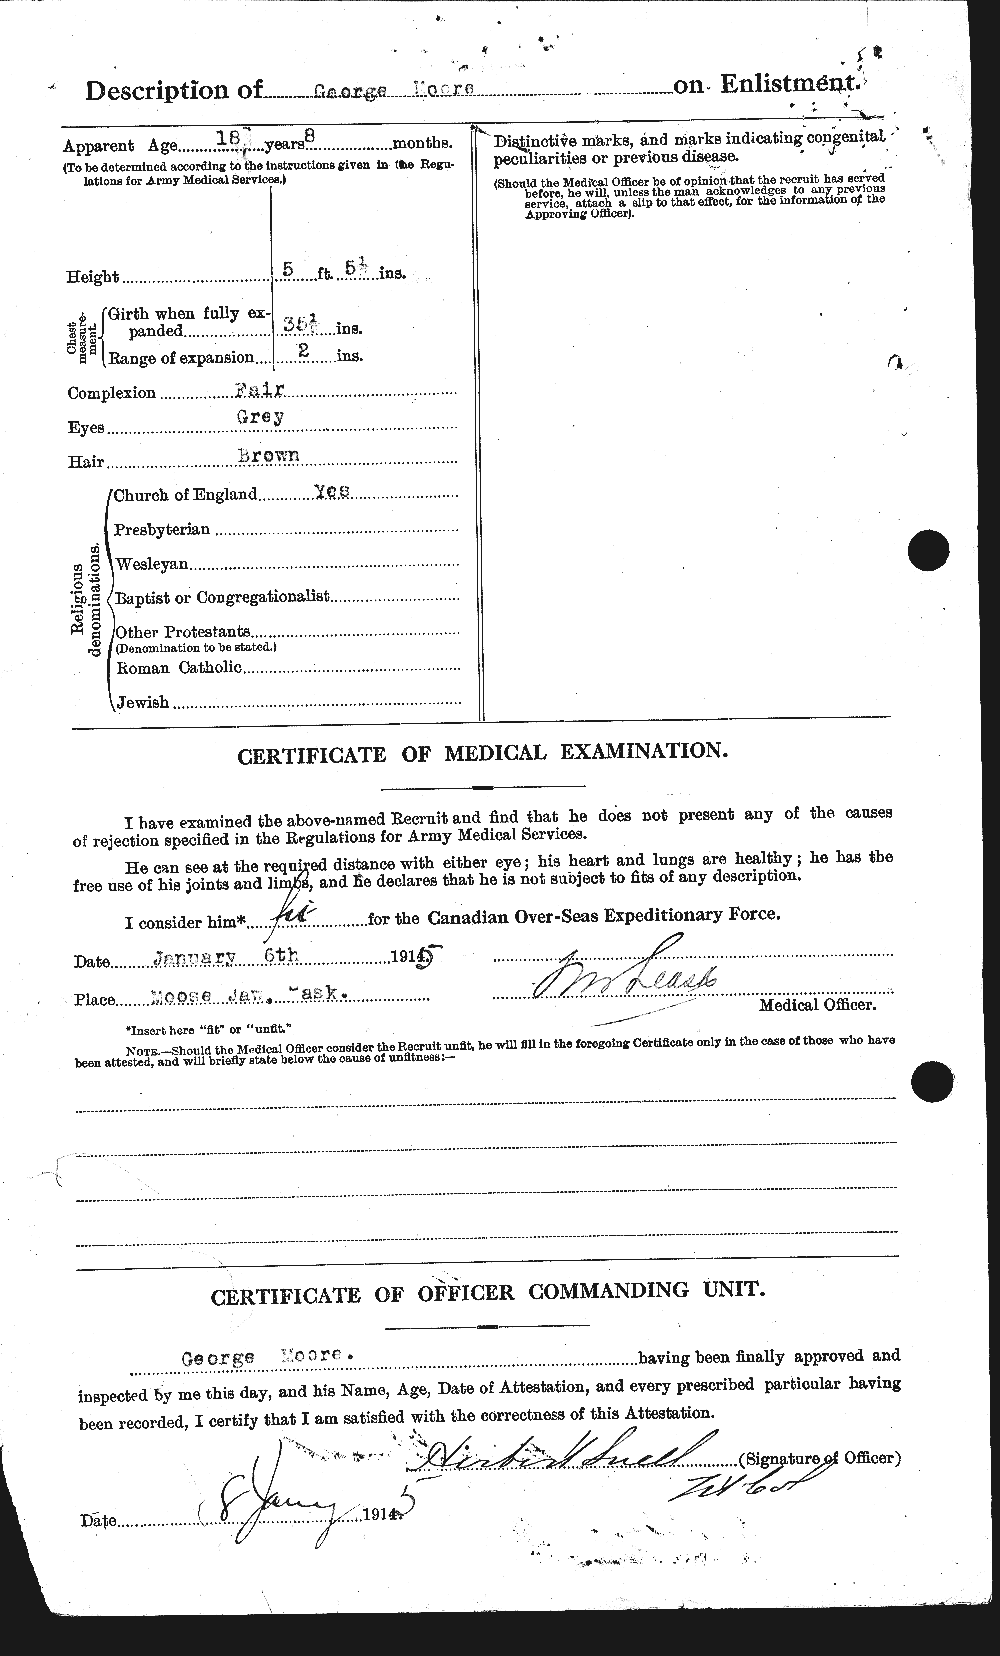 Personnel Records of the First World War - CEF 509412b